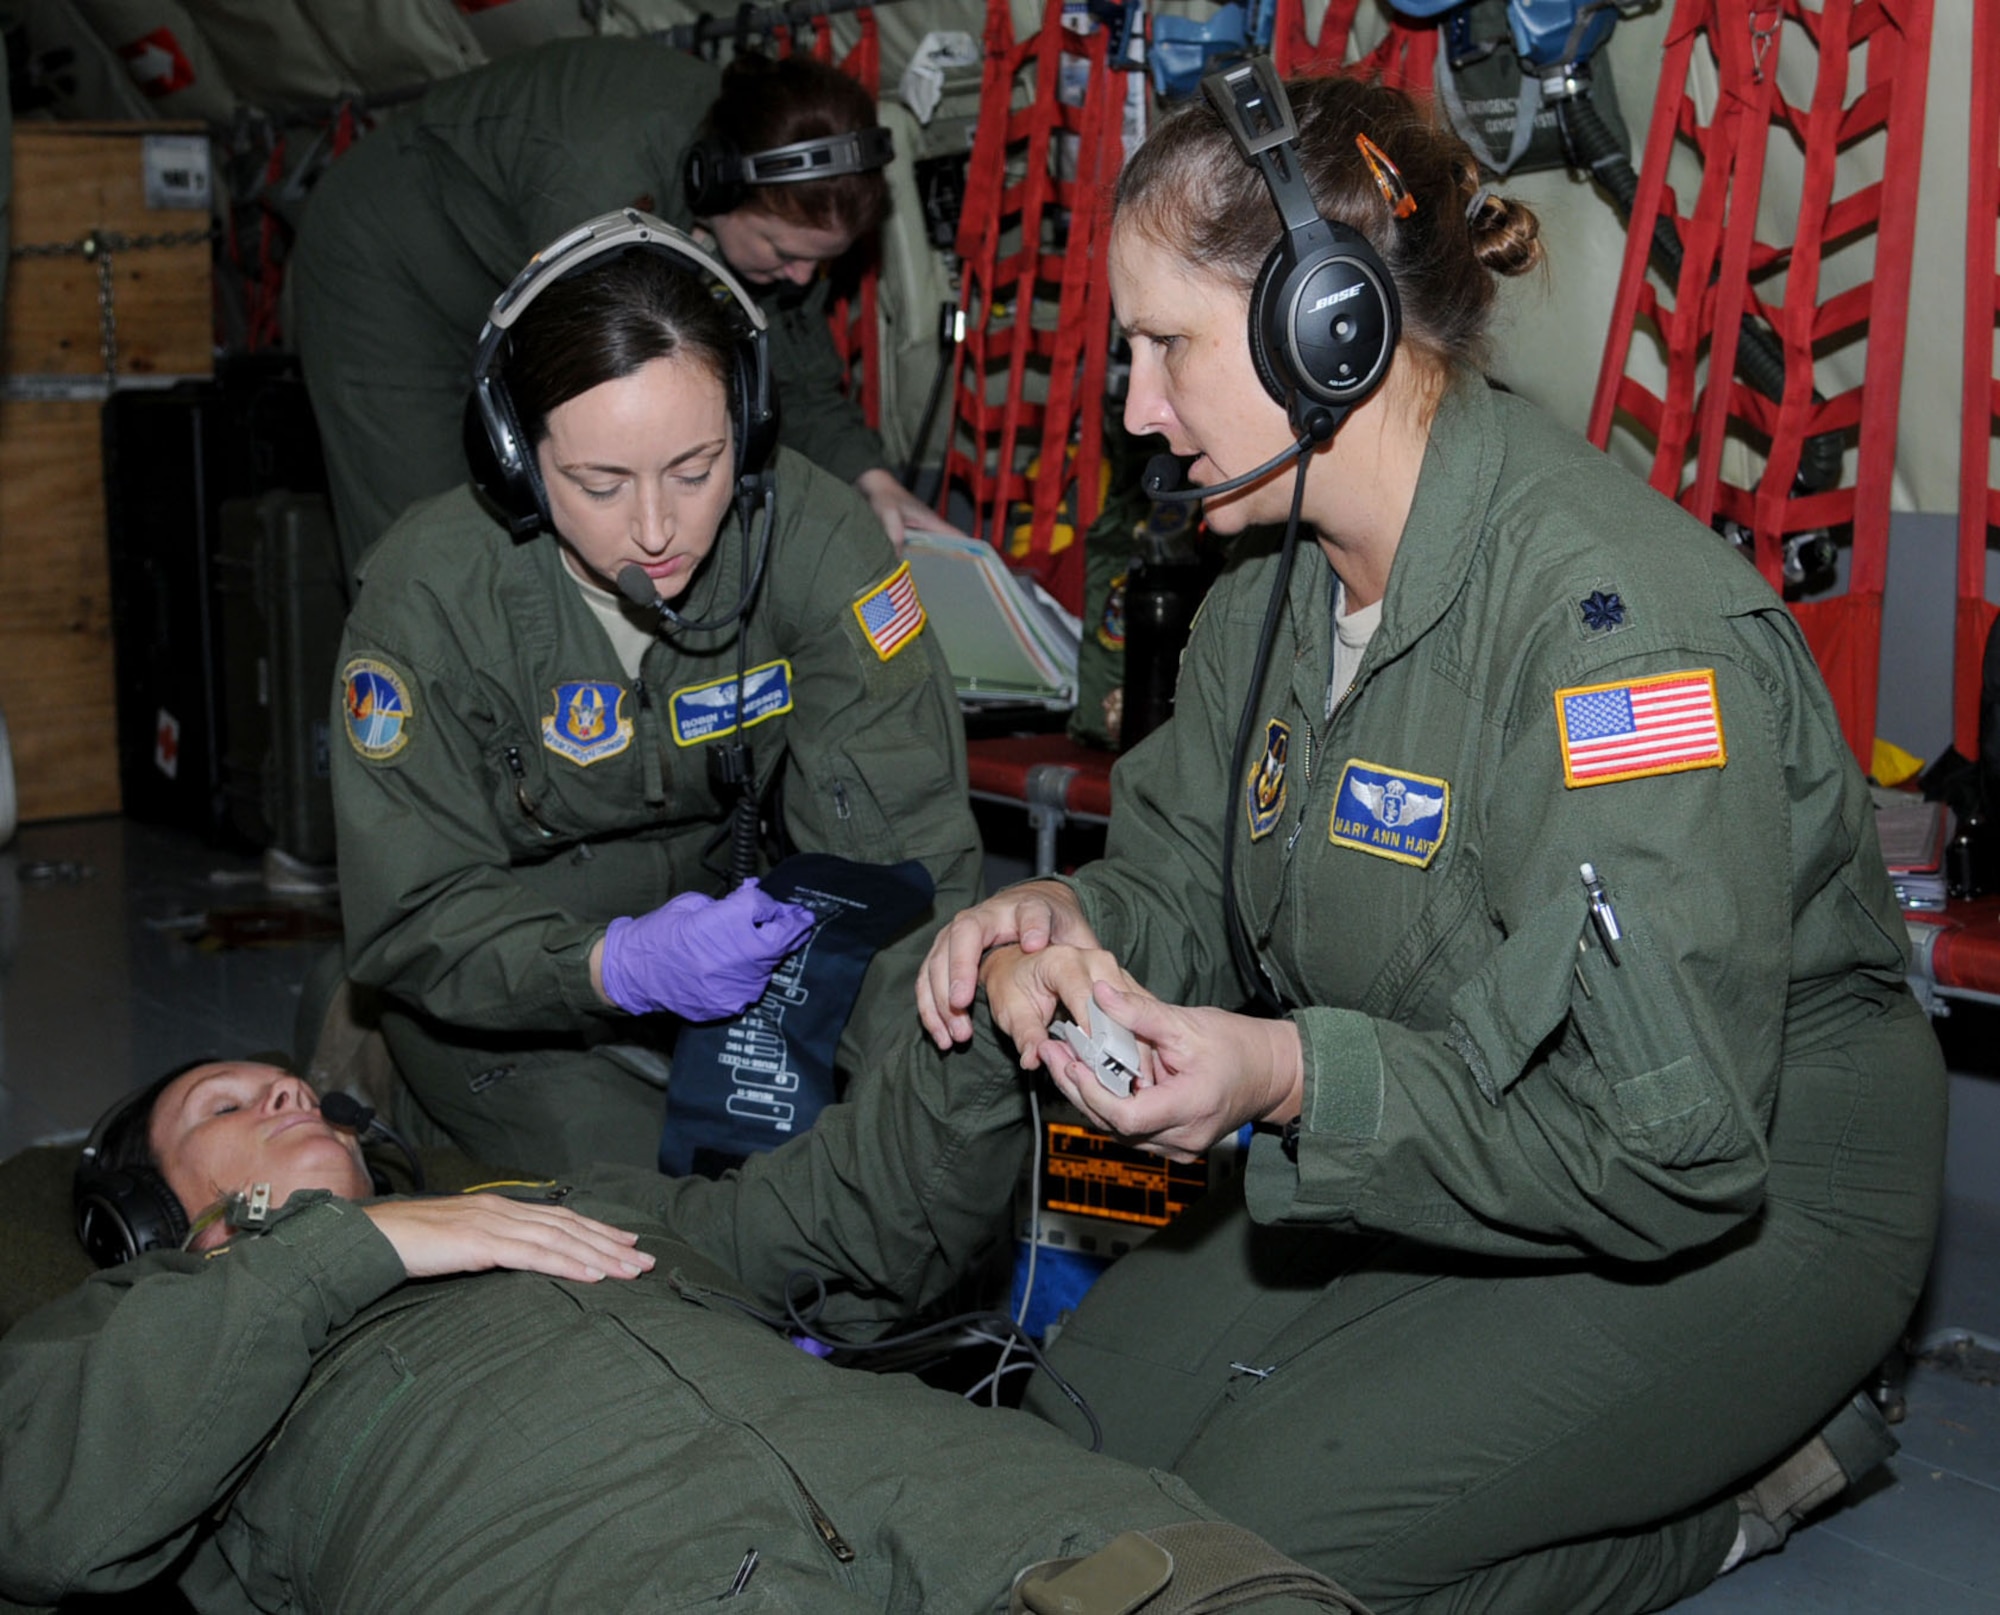 Flight nurse Lt. Col. Mary Ann Hayes and aeromedical technician Staff Sgt. Robin Messer both from the 45th AES, MacDill AFB, Florida, track the vitals of a simulated patient played by Master Sgt. Mary Beth Young, aeromedical technician, 45th AES  during a three-day training mission held Dec. 12, 2014. To stay proficient at their lifesaving skills, the technicians routinely climb aboard a MacDill based KC-135 to fine tune their caregiving skills. (U.S. Air force photo/Tech. Sgt. Peter Dean/released)